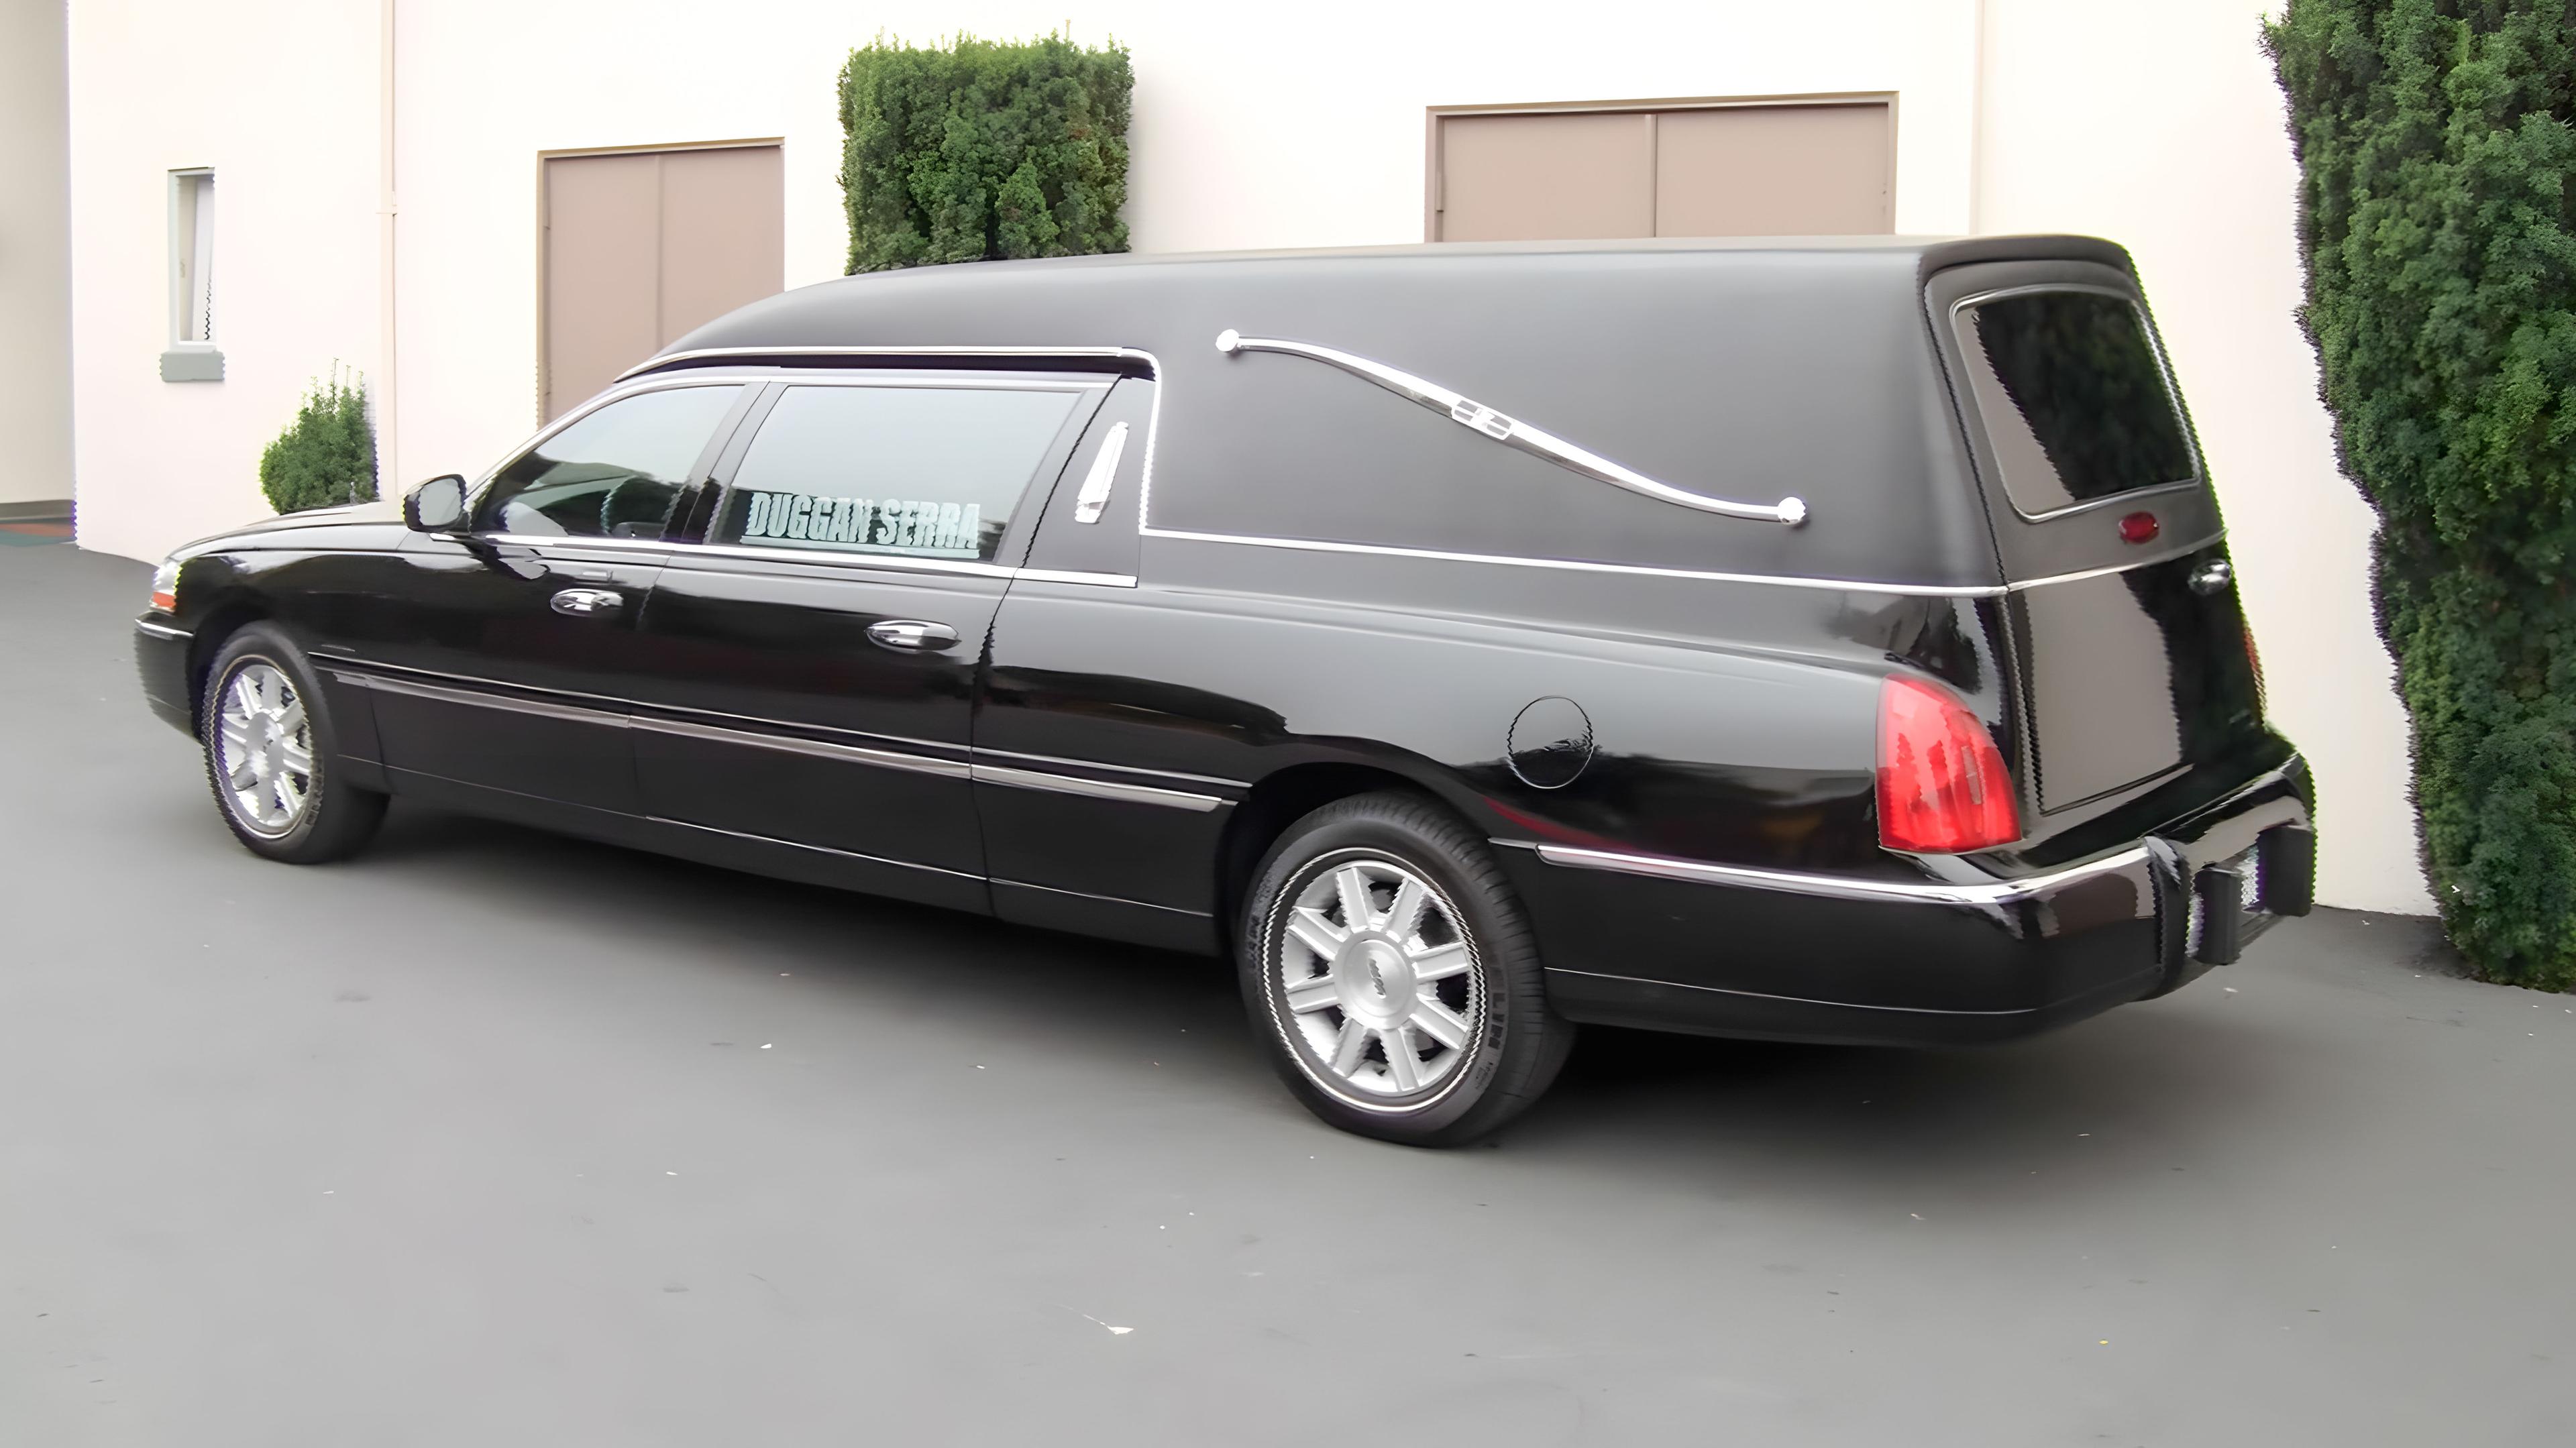 Picture of Duggan's Serra Mortuary's transport vehicles are clean and well-maintained. - Duggan's Serra Mortuary